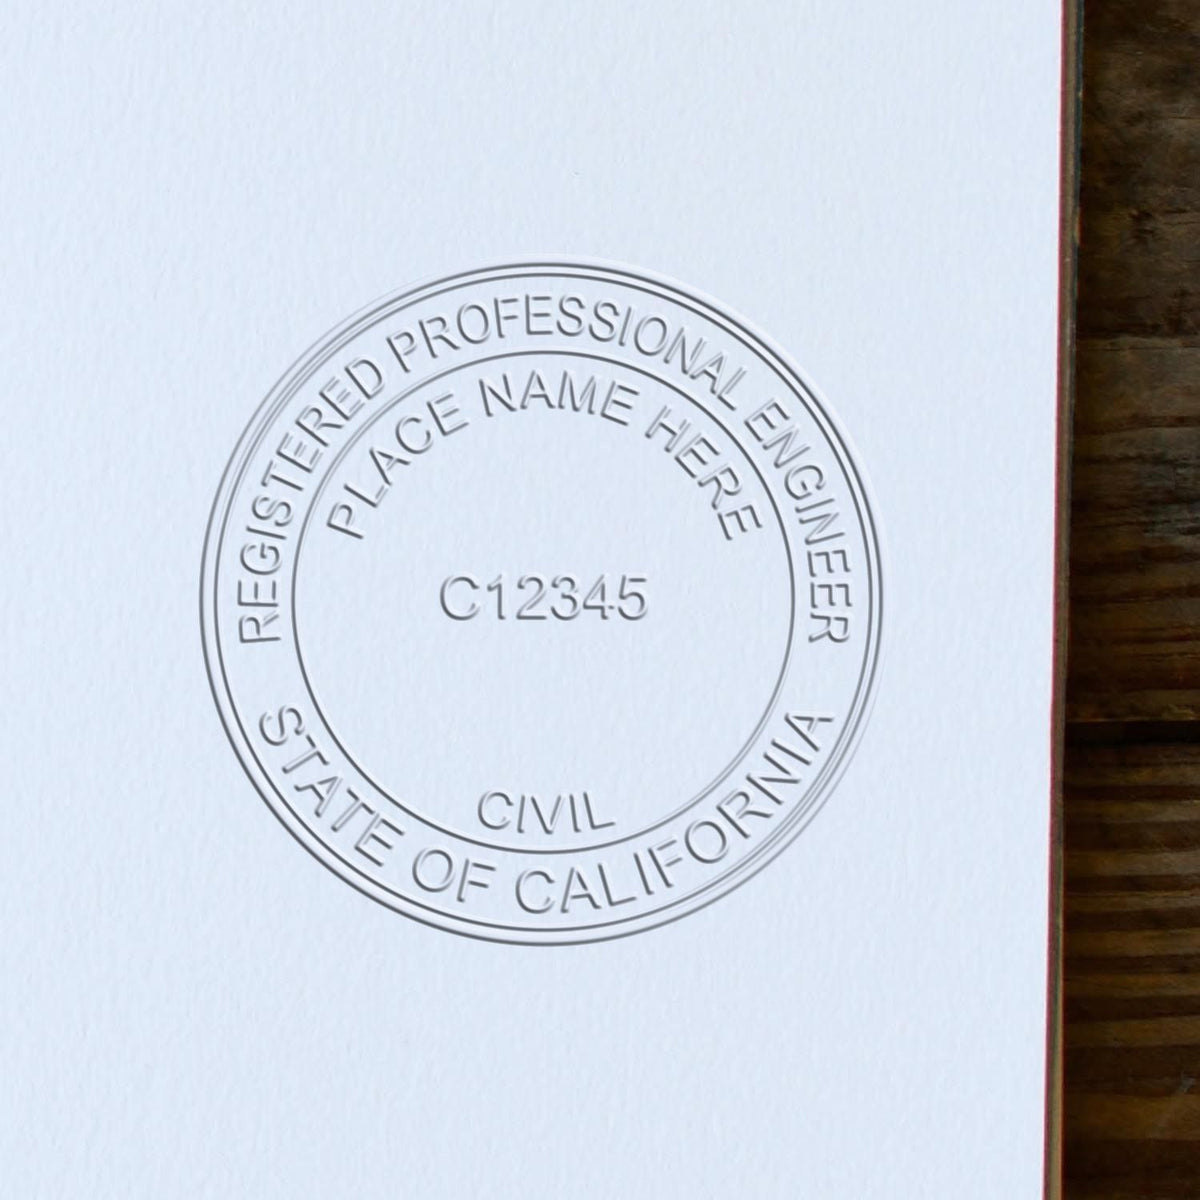 A photograph of the Soft California Professional Engineer Seal stamp impression reveals a vivid, professional image of the on paper.